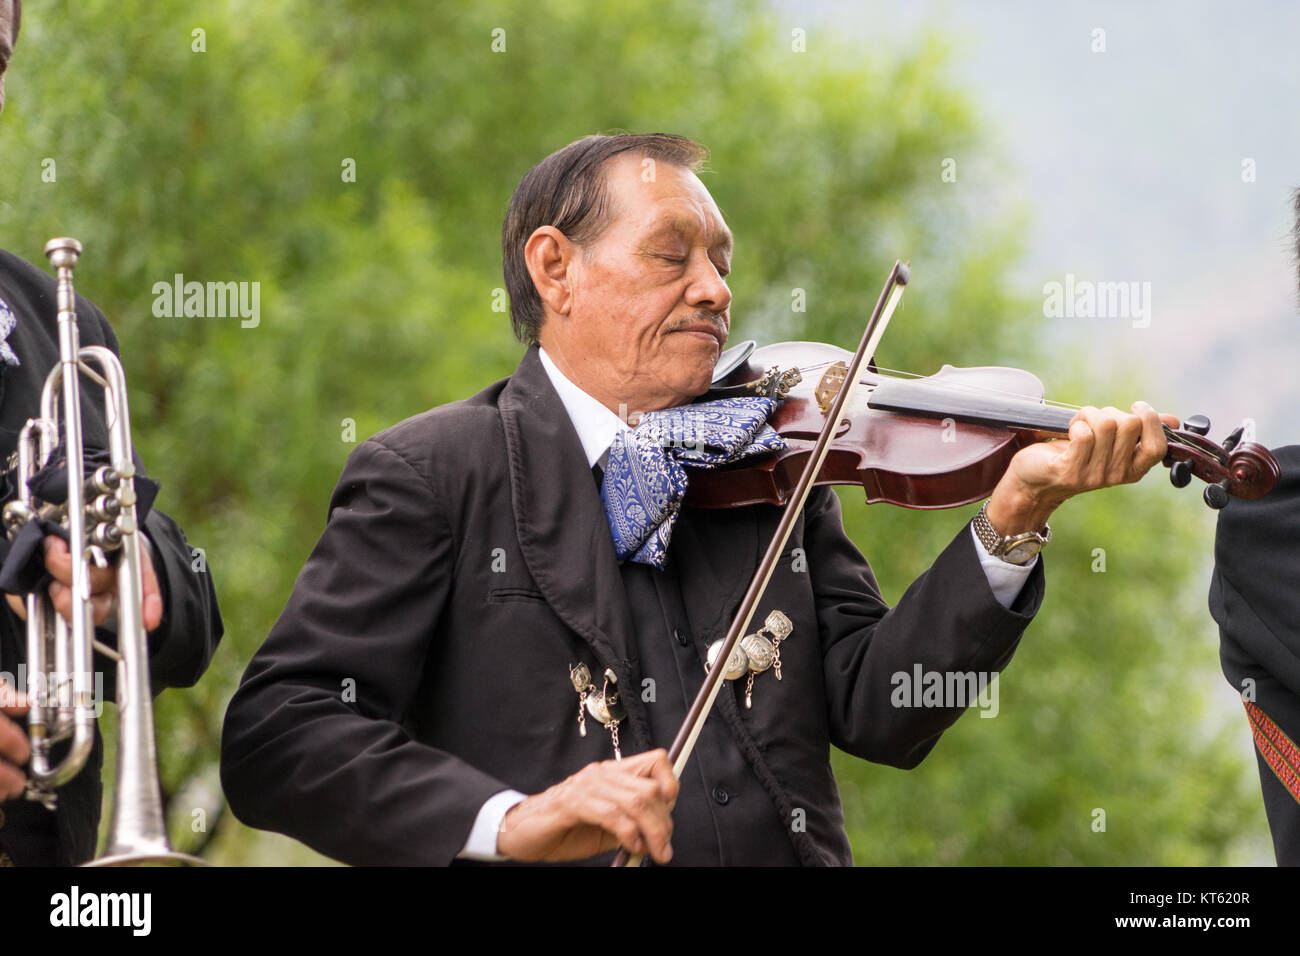 Mariachi violinist in deep concentration, playing outdoors Stock Photo